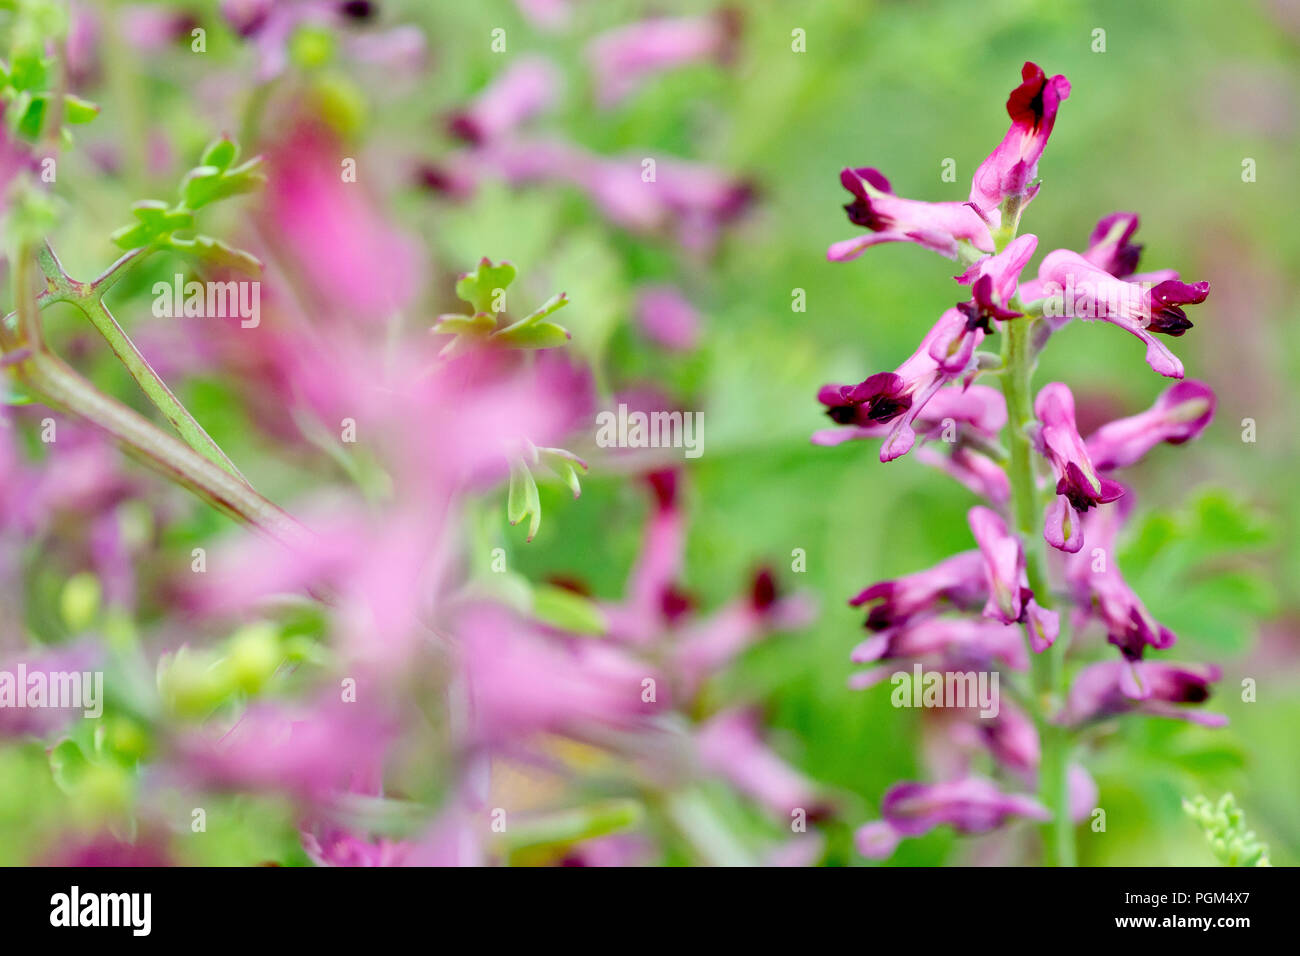 Common Fumitory (fumaria officinalis), close up of a single flower stem out of many. Stock Photo